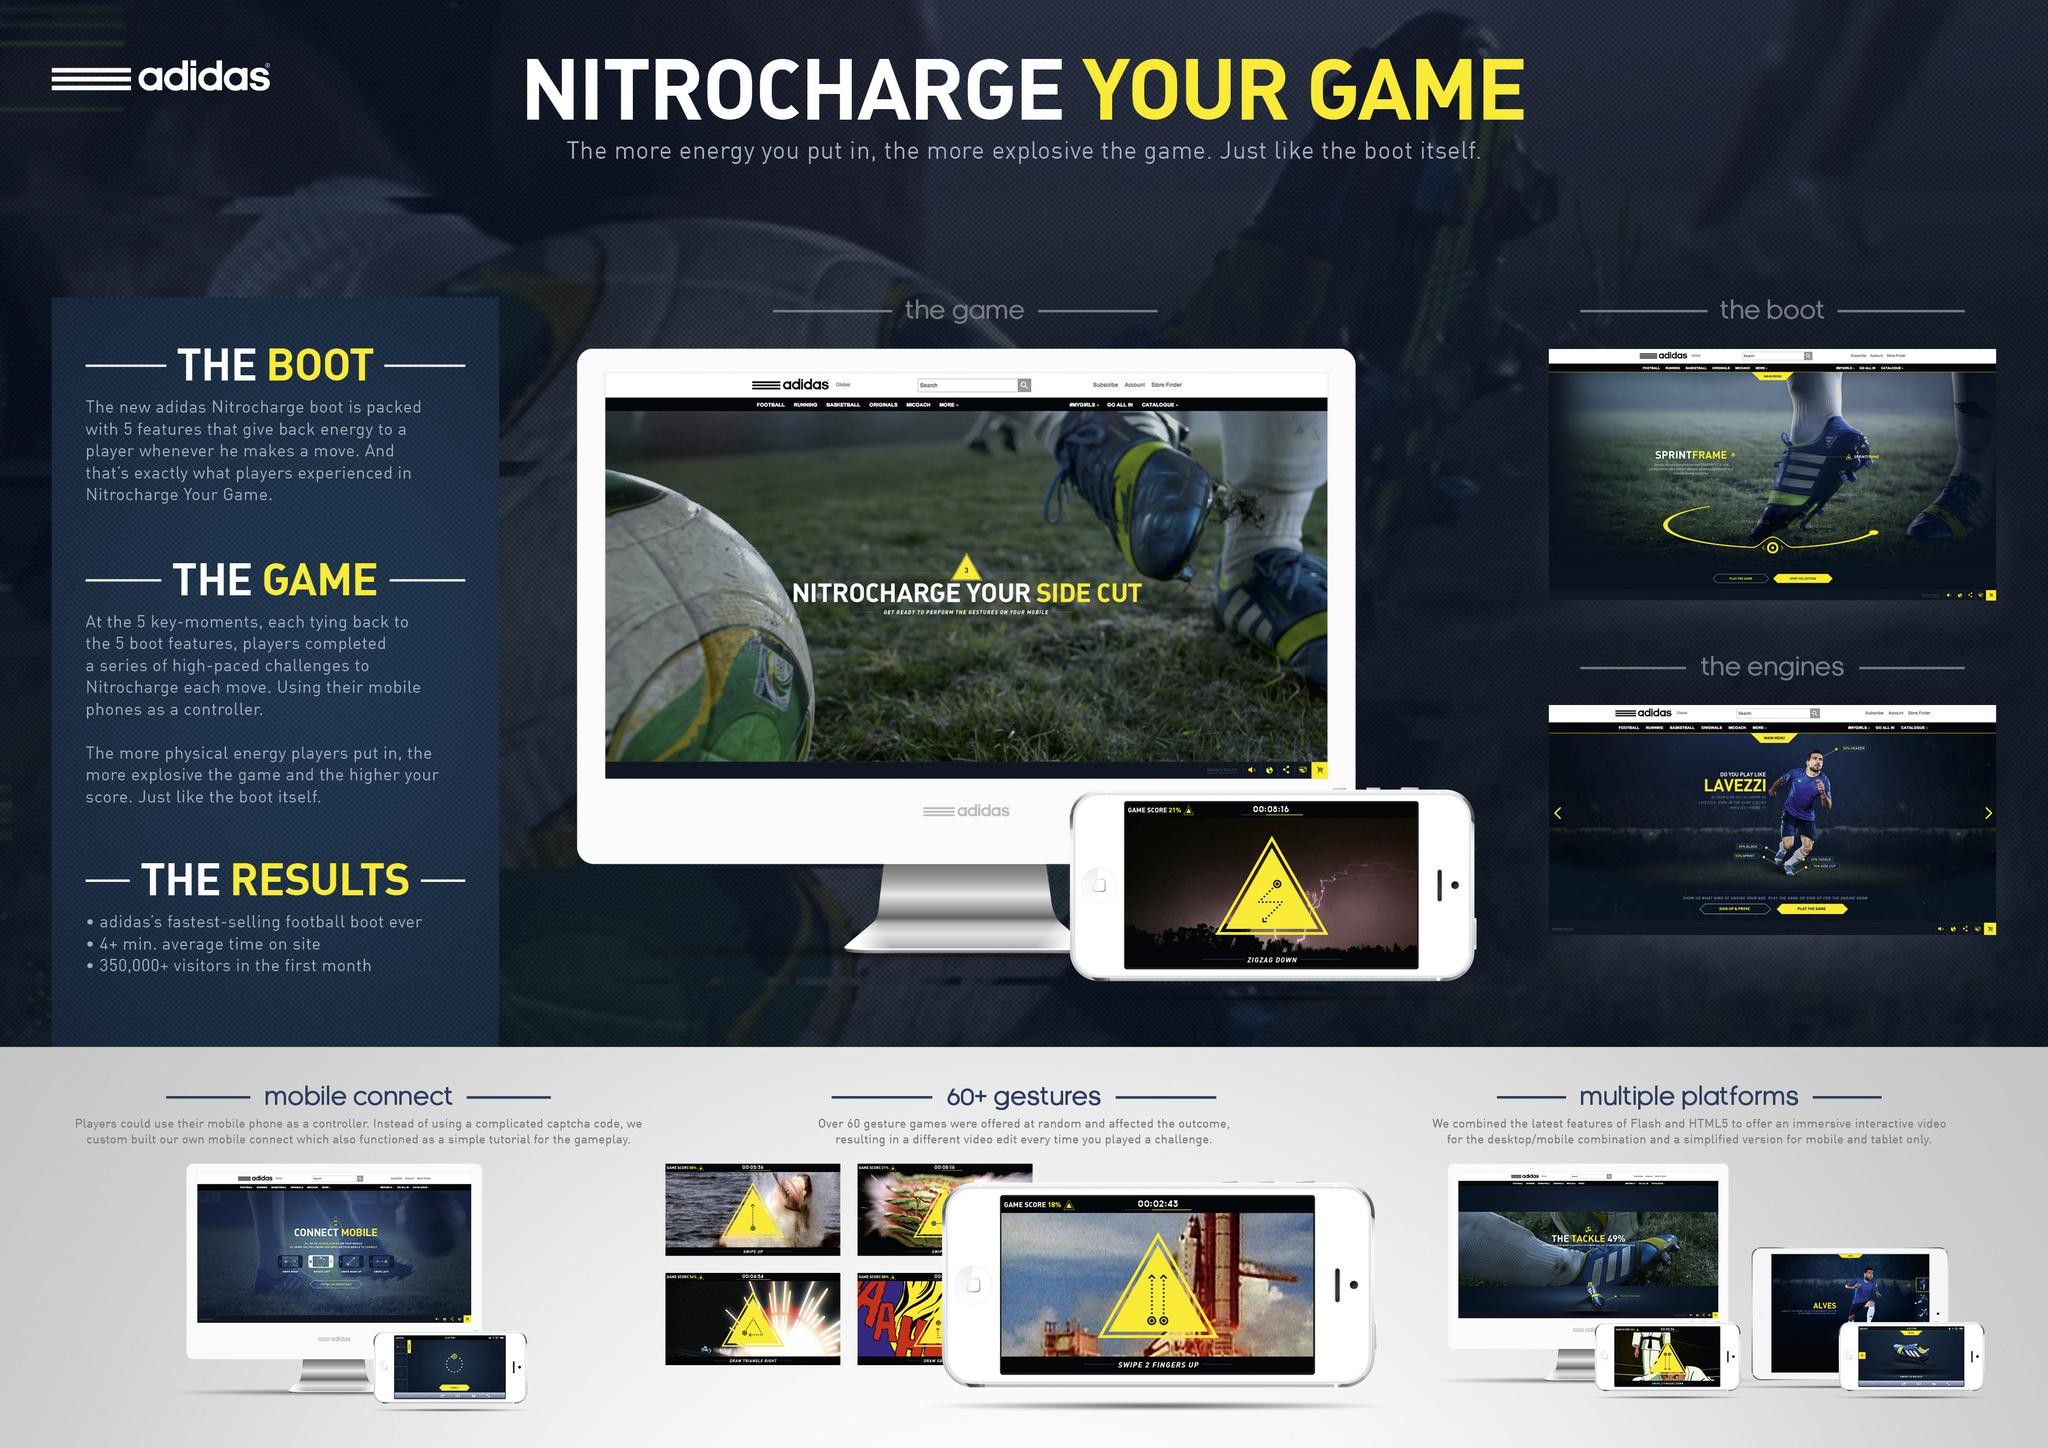 NITROCHARGE YOUR GAME